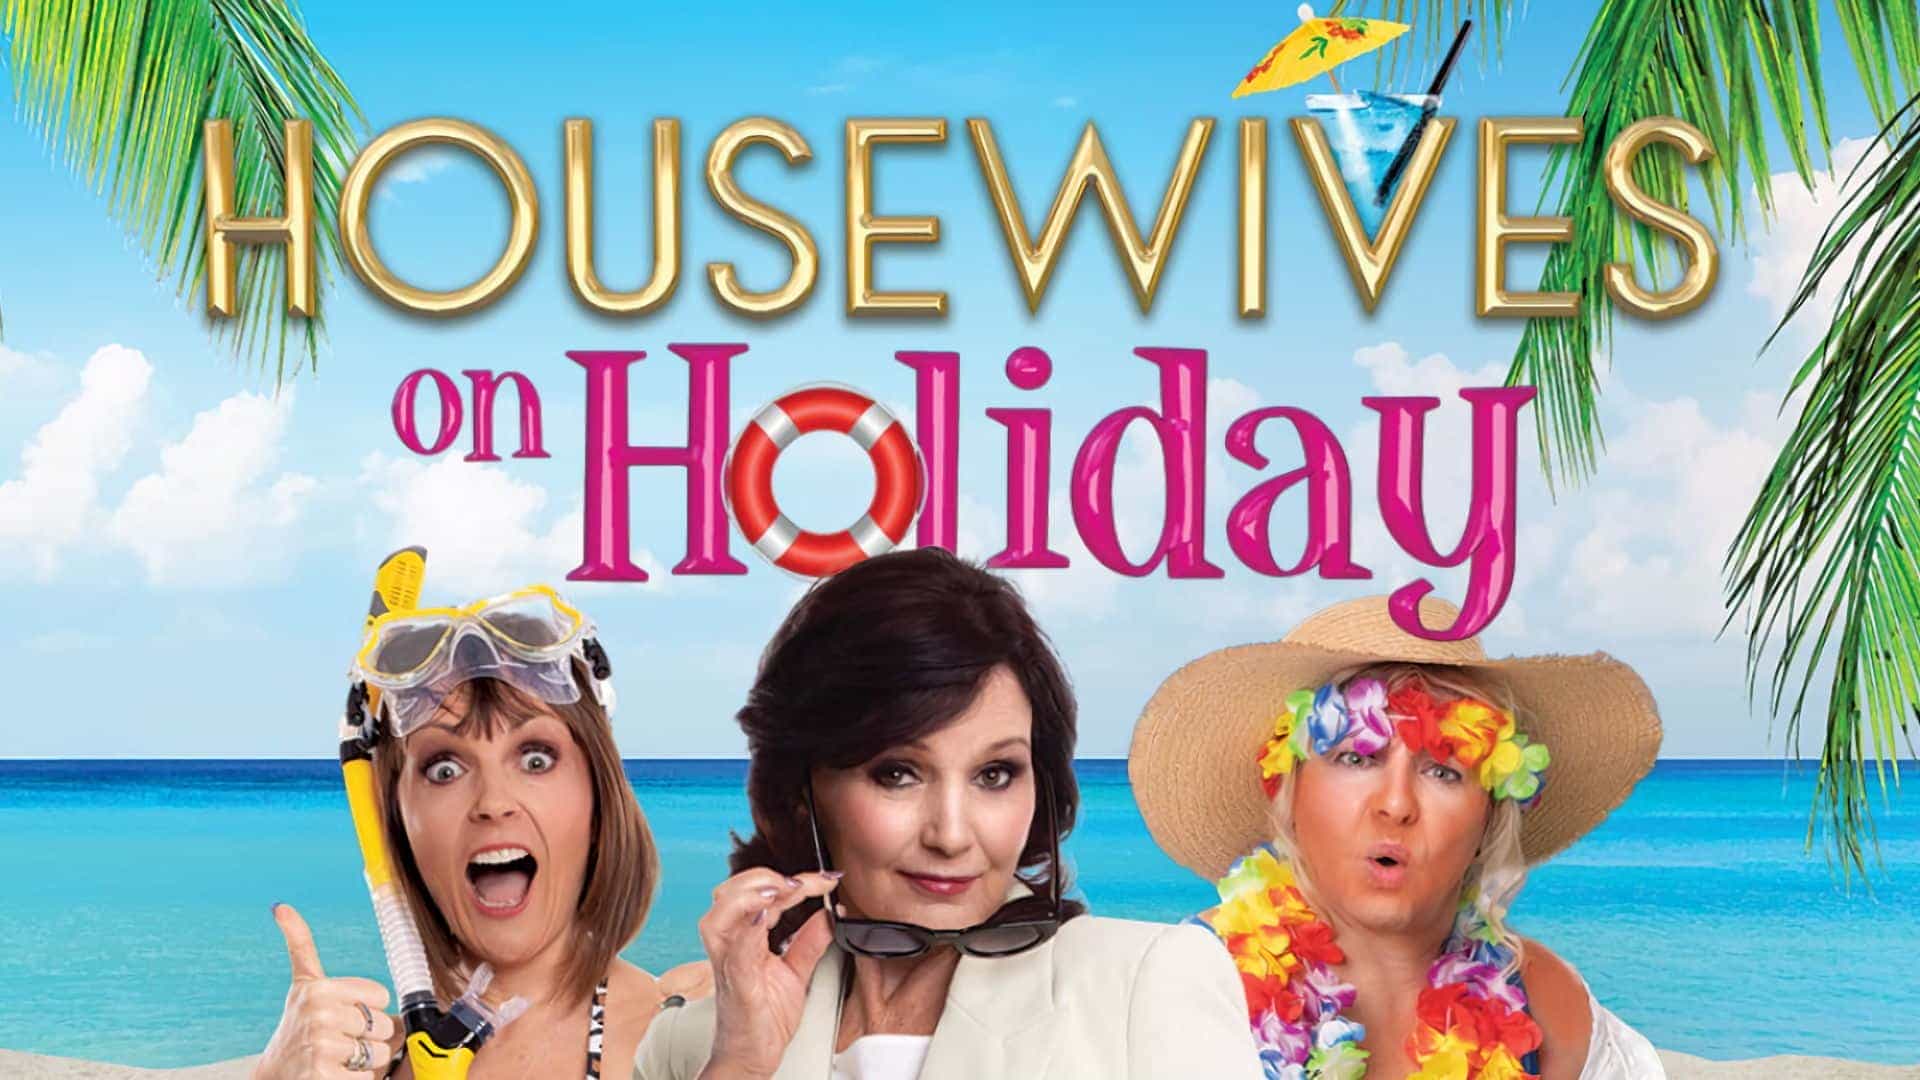 Housewives On Holiday